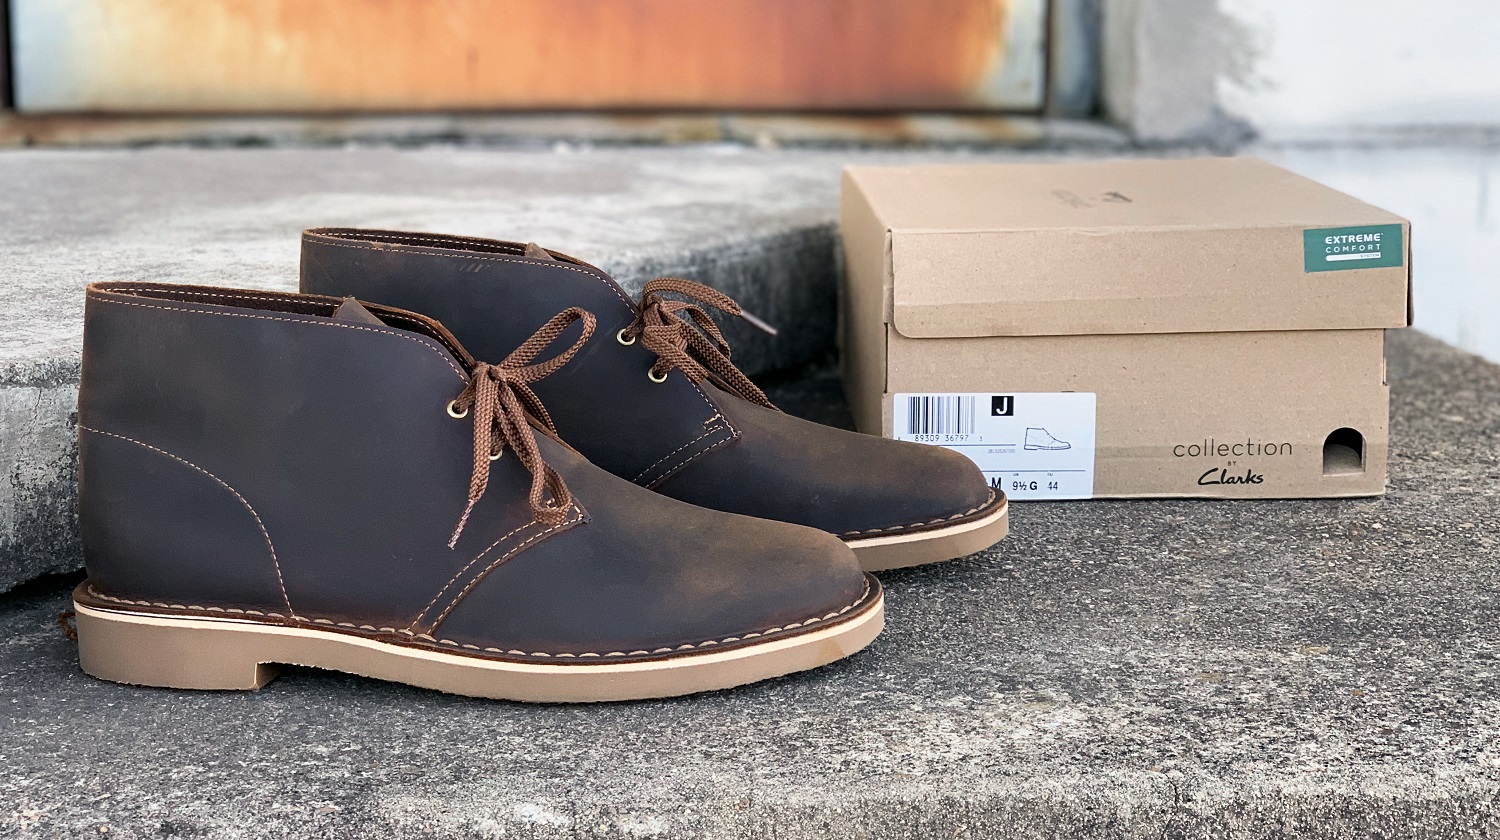 Enviar casual máquina Steal Alert: The new Clarks Bushacre 3 for under $40